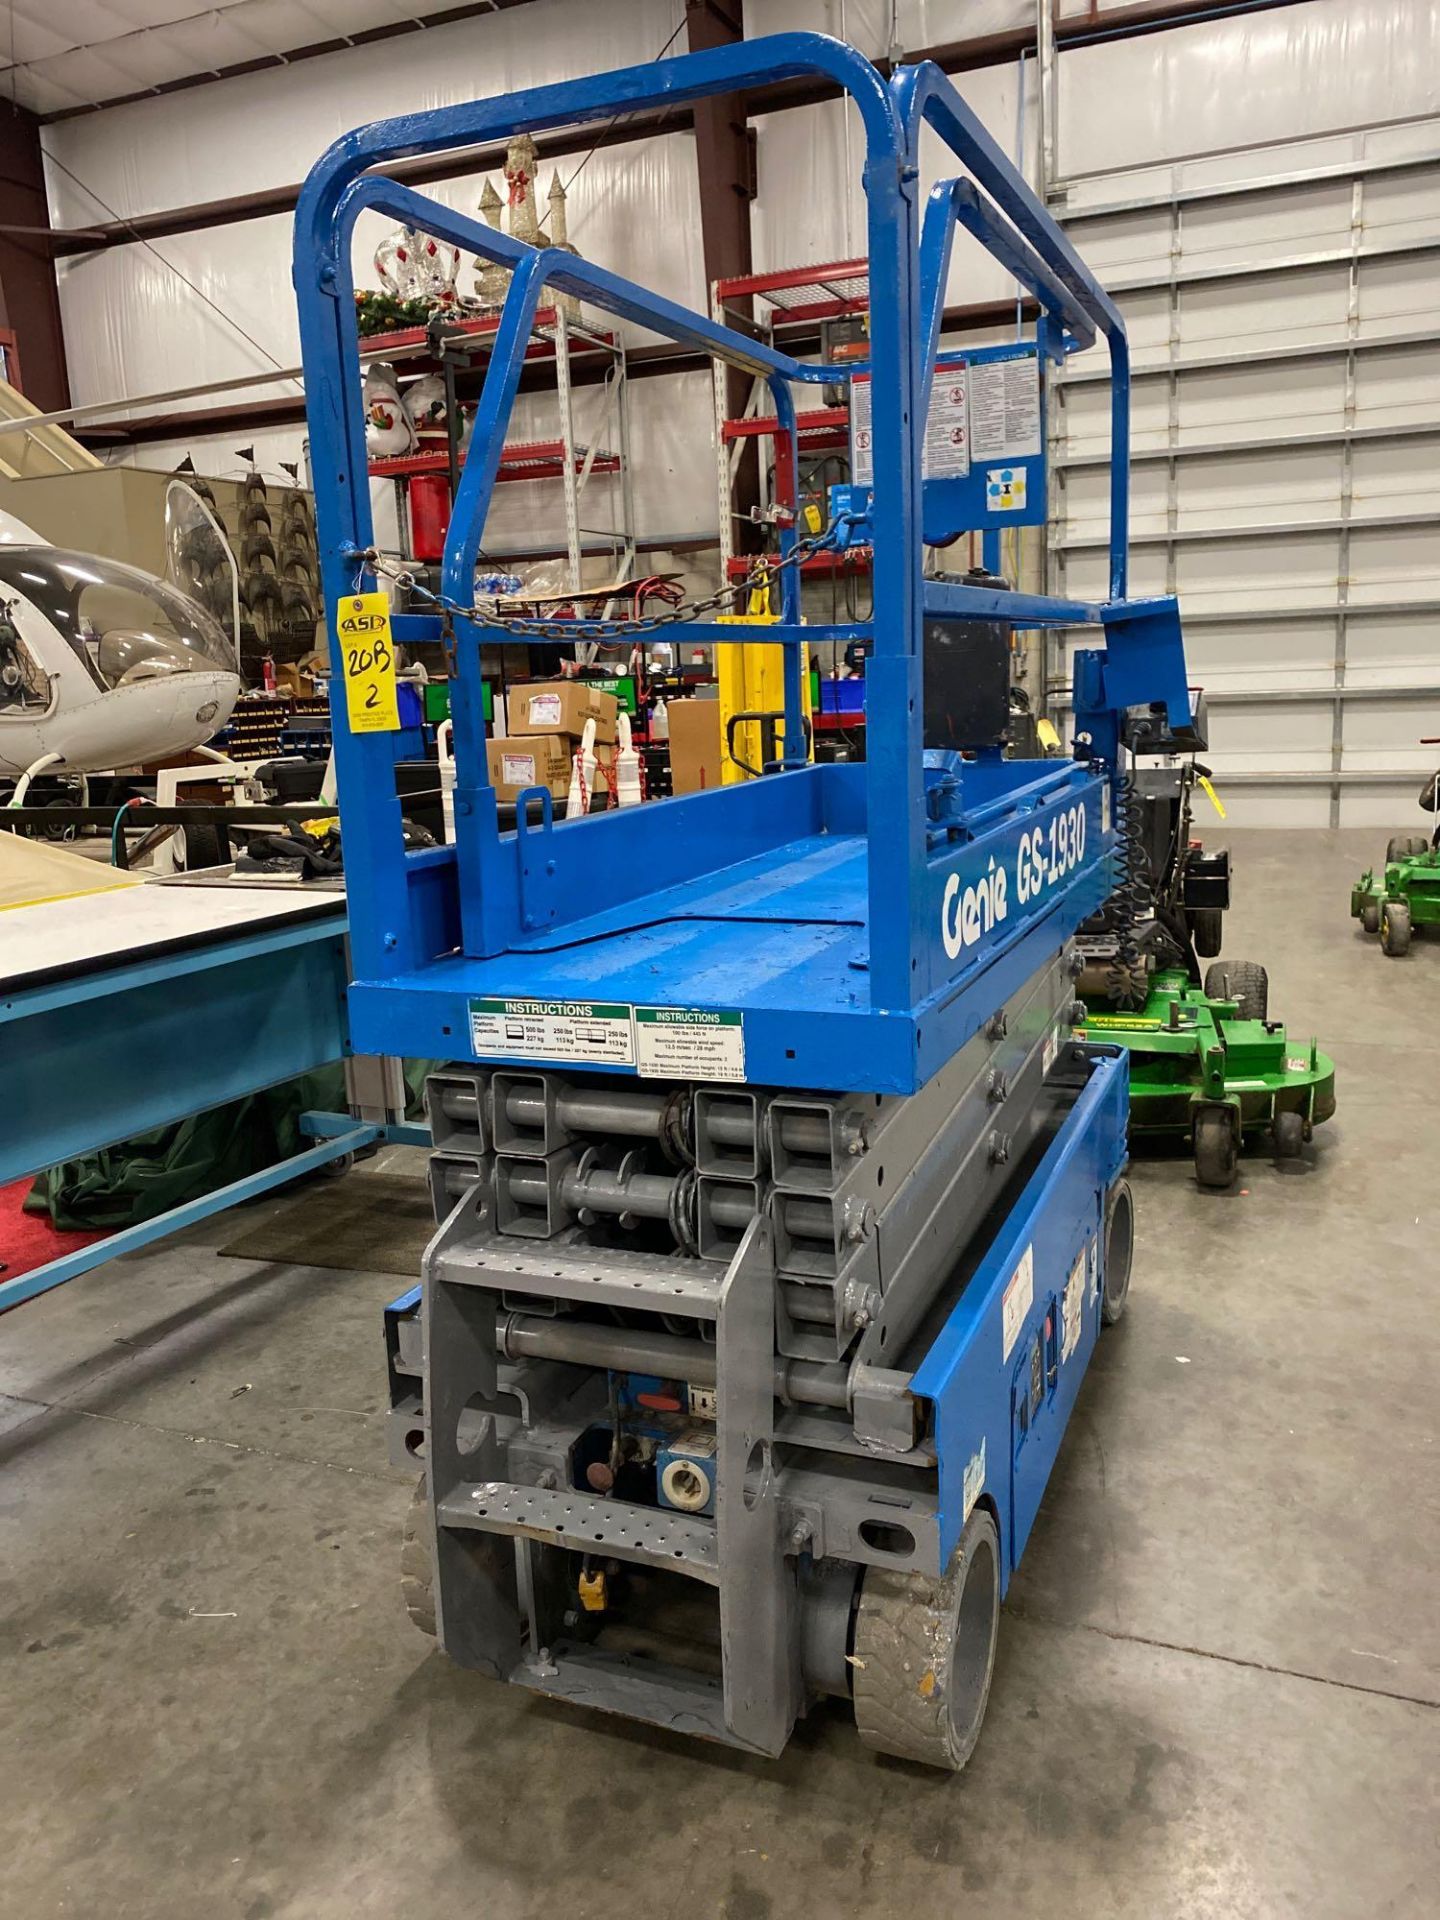 2012 GENIE ELECTRIC SCISSOR LIFT, SELF PROPELLED, 19' PLATFORM HEIGHT, BUILT IN BATTERY CHARGER, SLI - Image 2 of 6